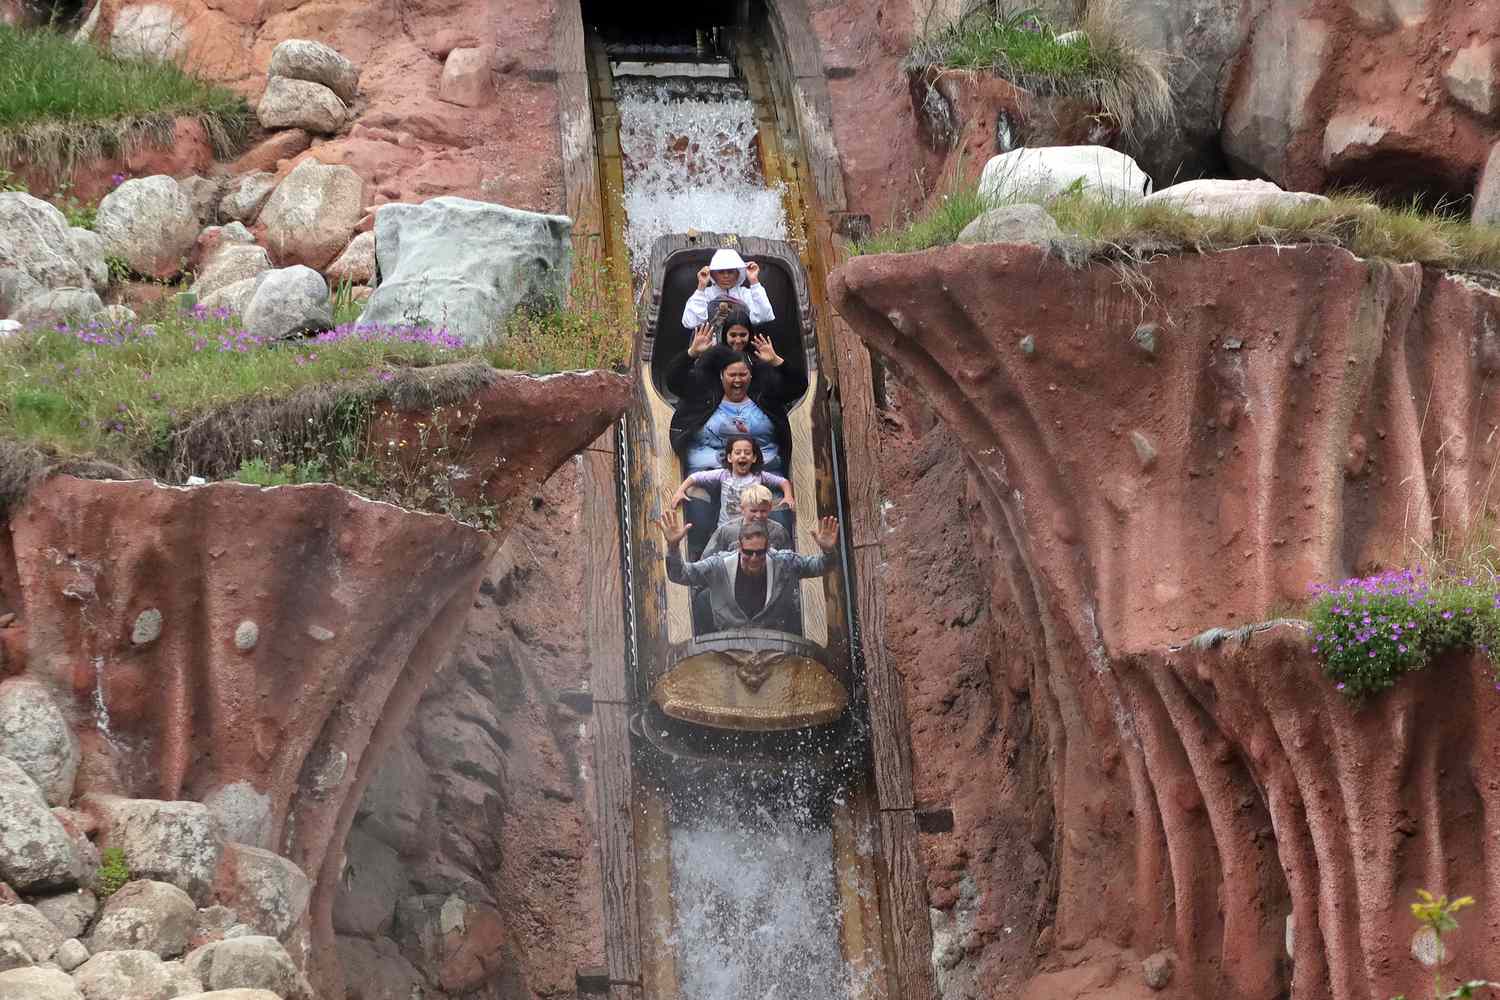 People ride the Splash Mountain attraction at the Disneyland theme park on April 13, 2023, in Anaheim, California.